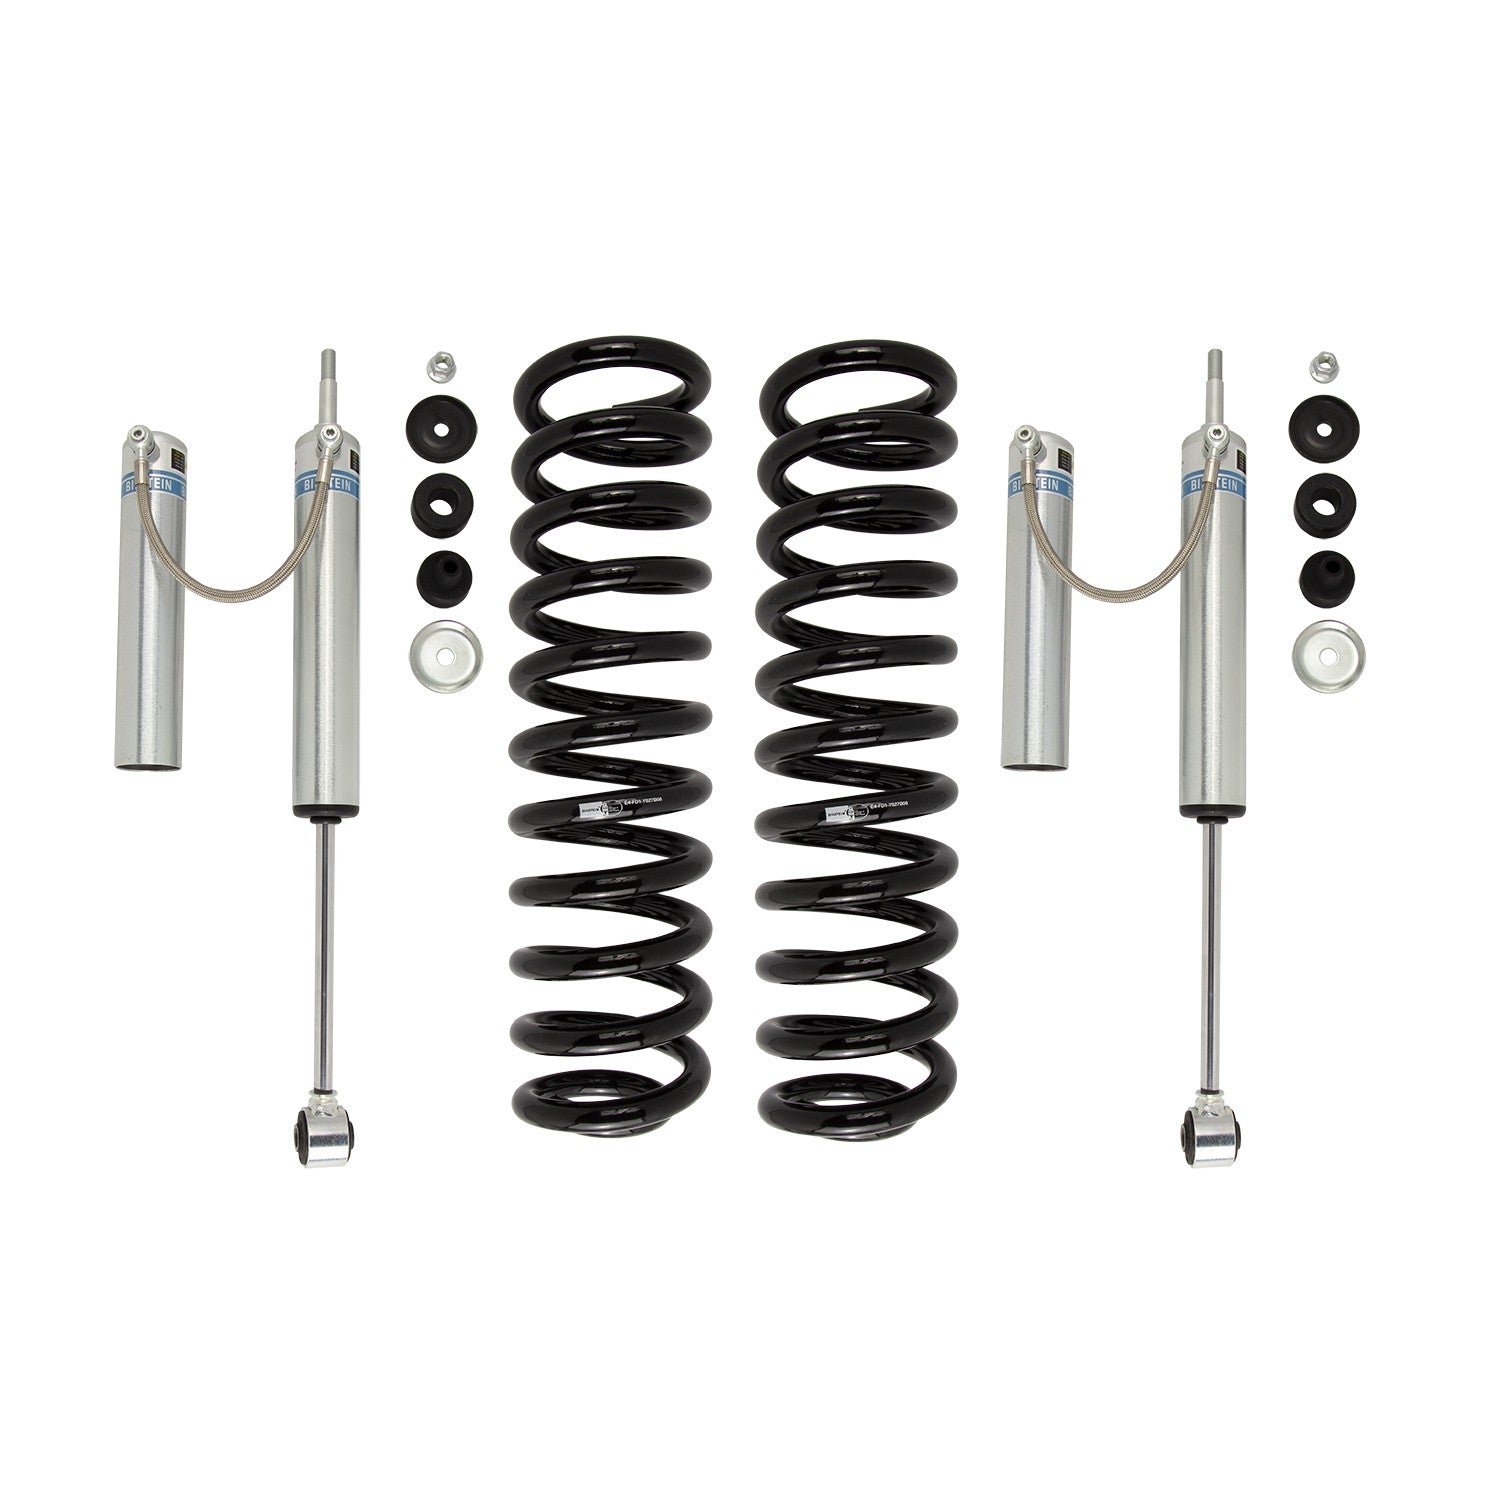 Bilstein B8 5162 46-276827 Front Suspension Leveling Kit for Ford F-250 Super Duty F-350 Super Duty 4WD